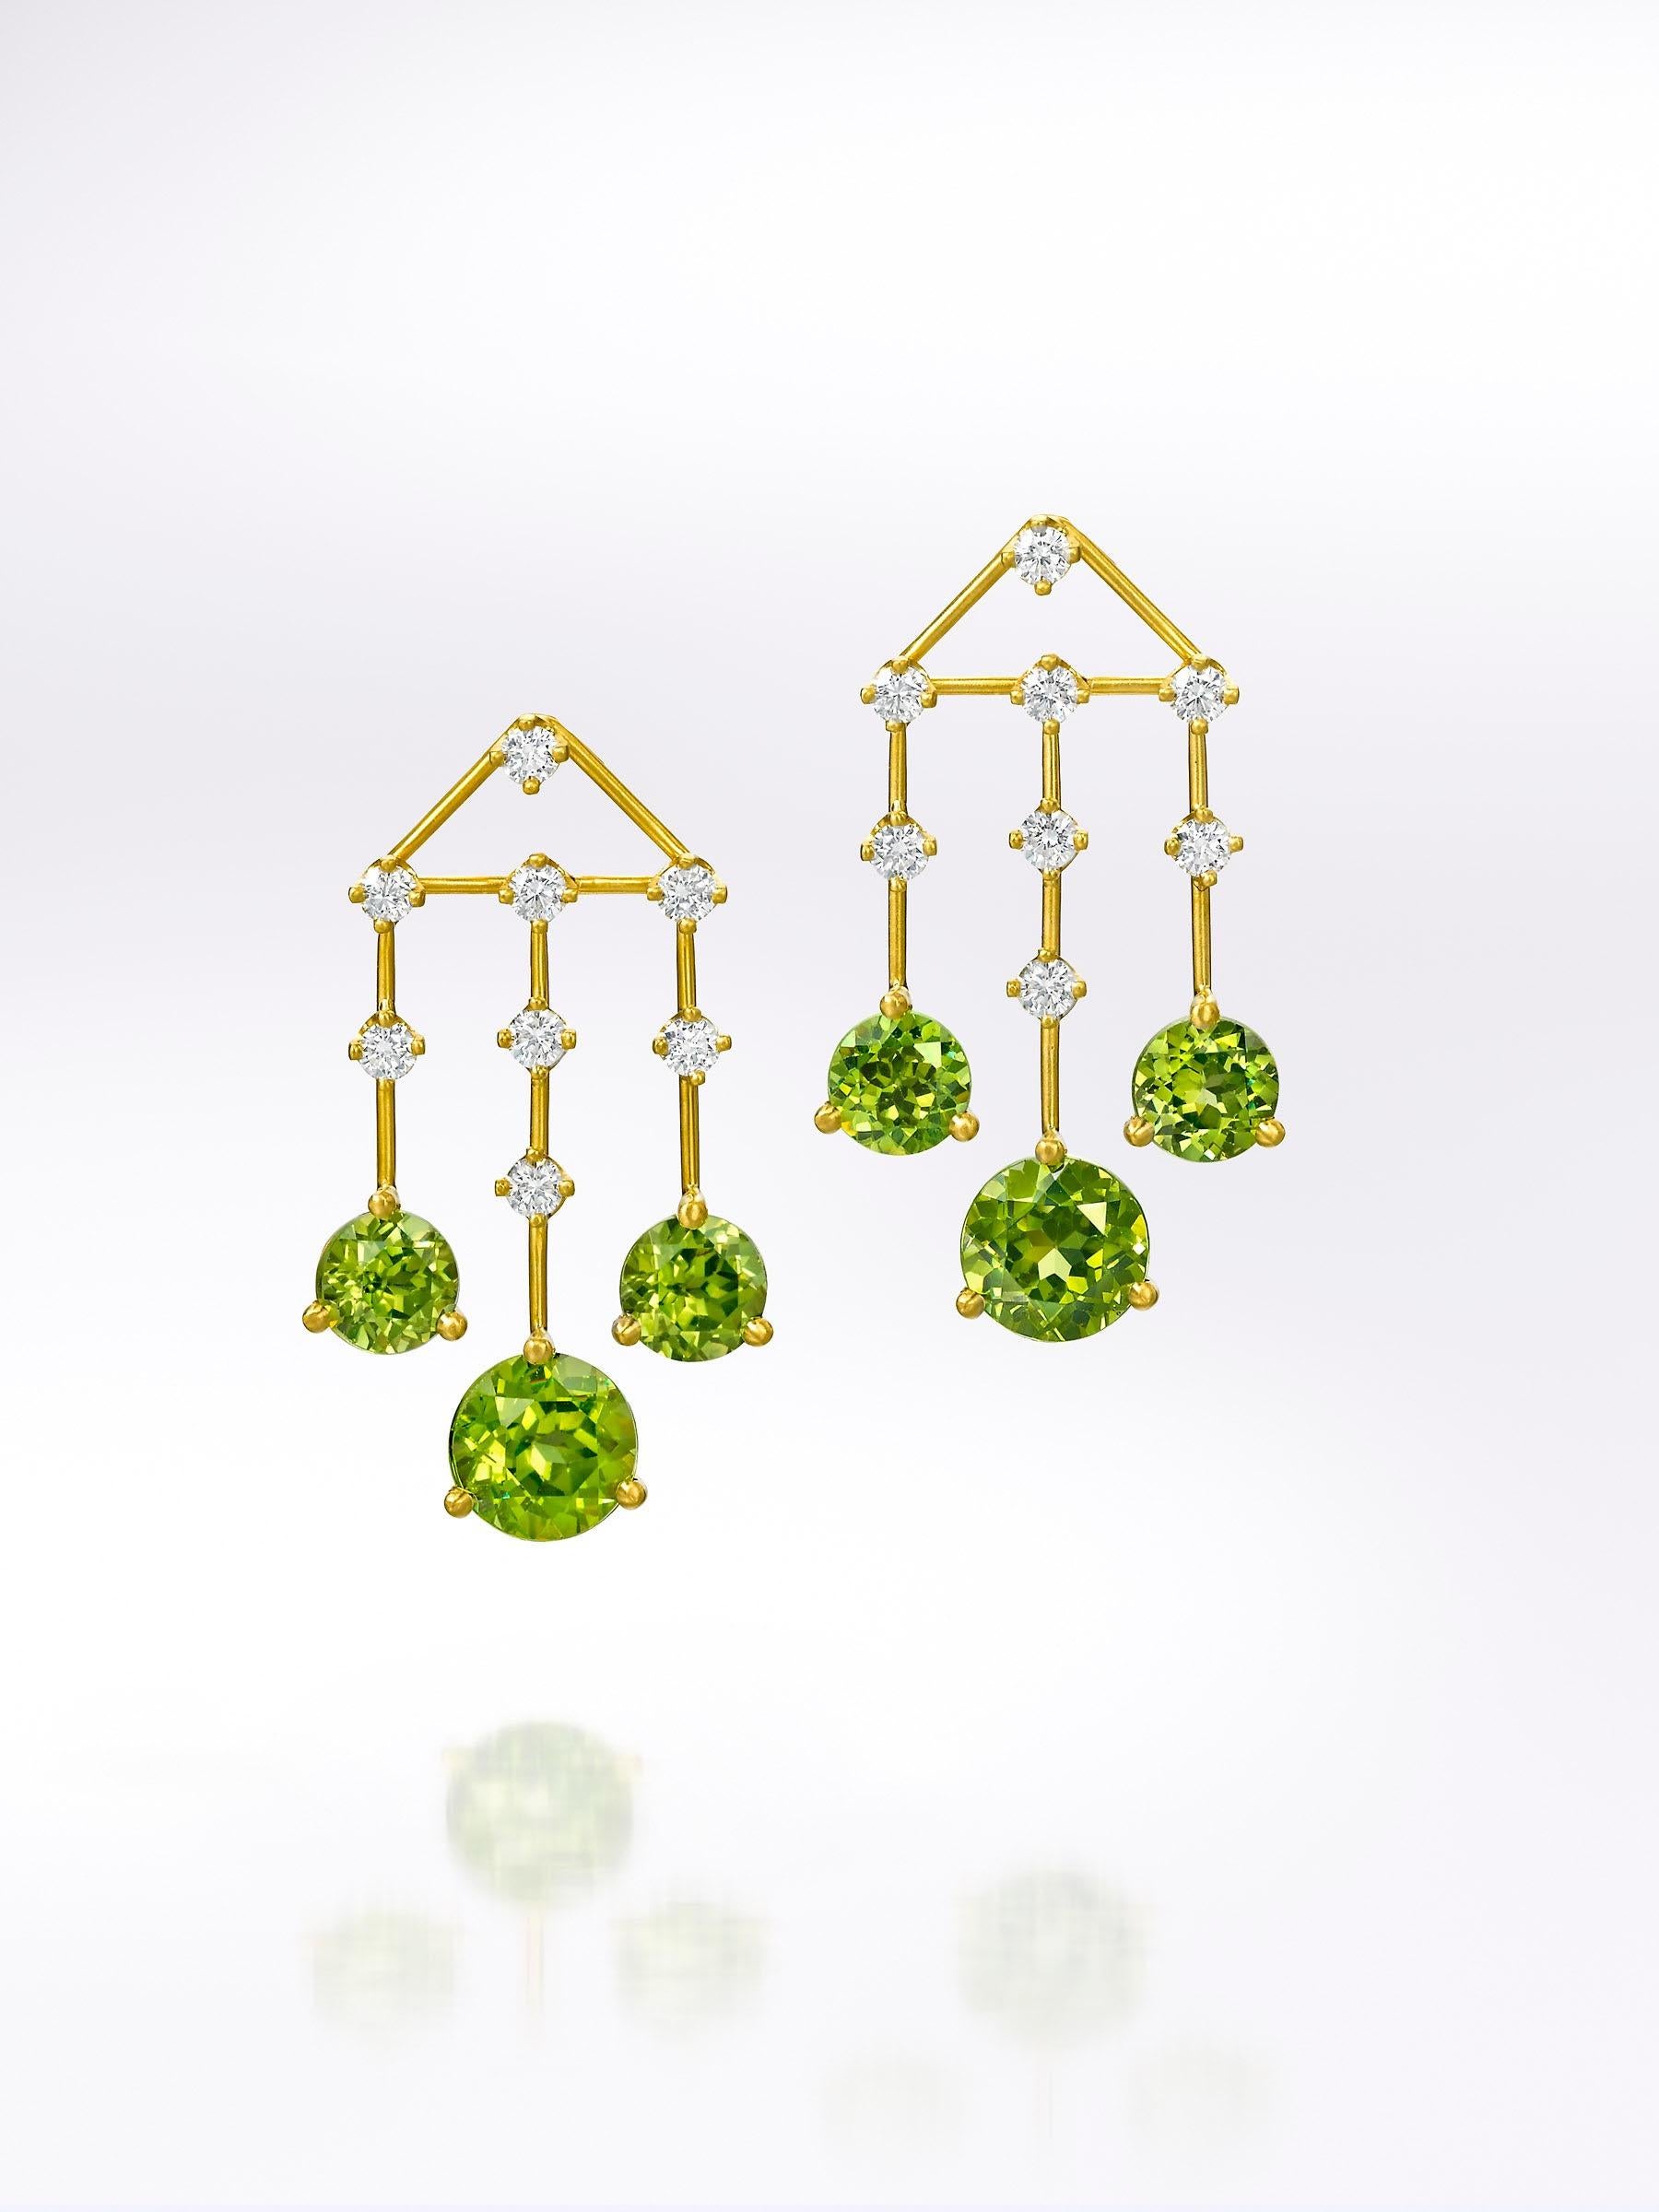 The exceptional beauty of the peridots used for these earrings made Wendy decide that this design should never be replicated.  Peridot is one of August's birthstones, making these chandelier earrings an ideal birthday gift for that month ... or for